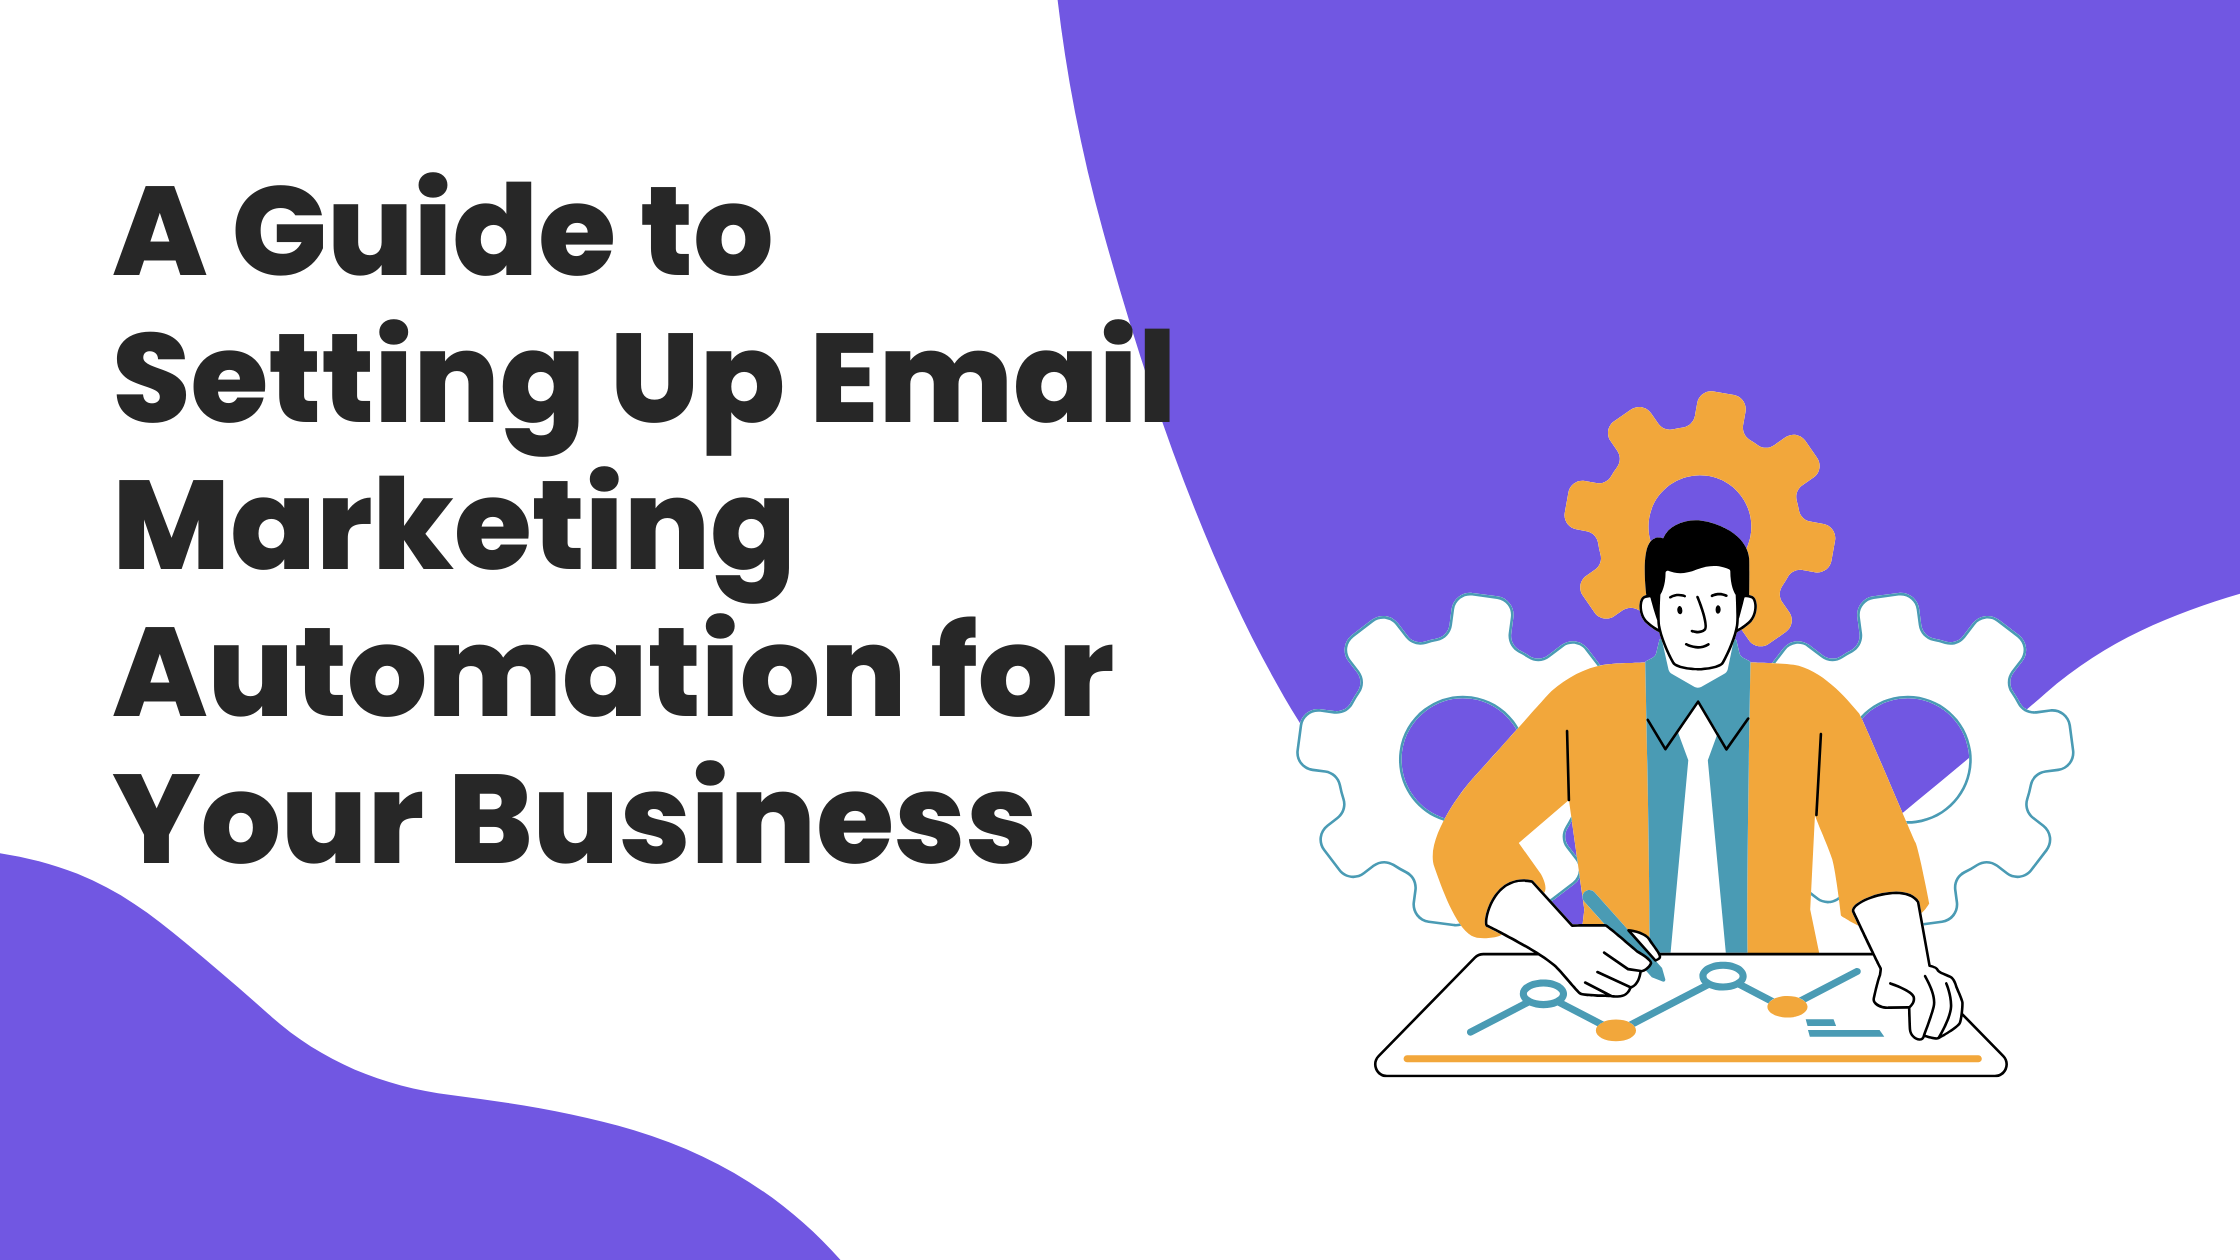 Unlocking Growth: A Guide to Setting Up Email Marketing Automation for Your Business